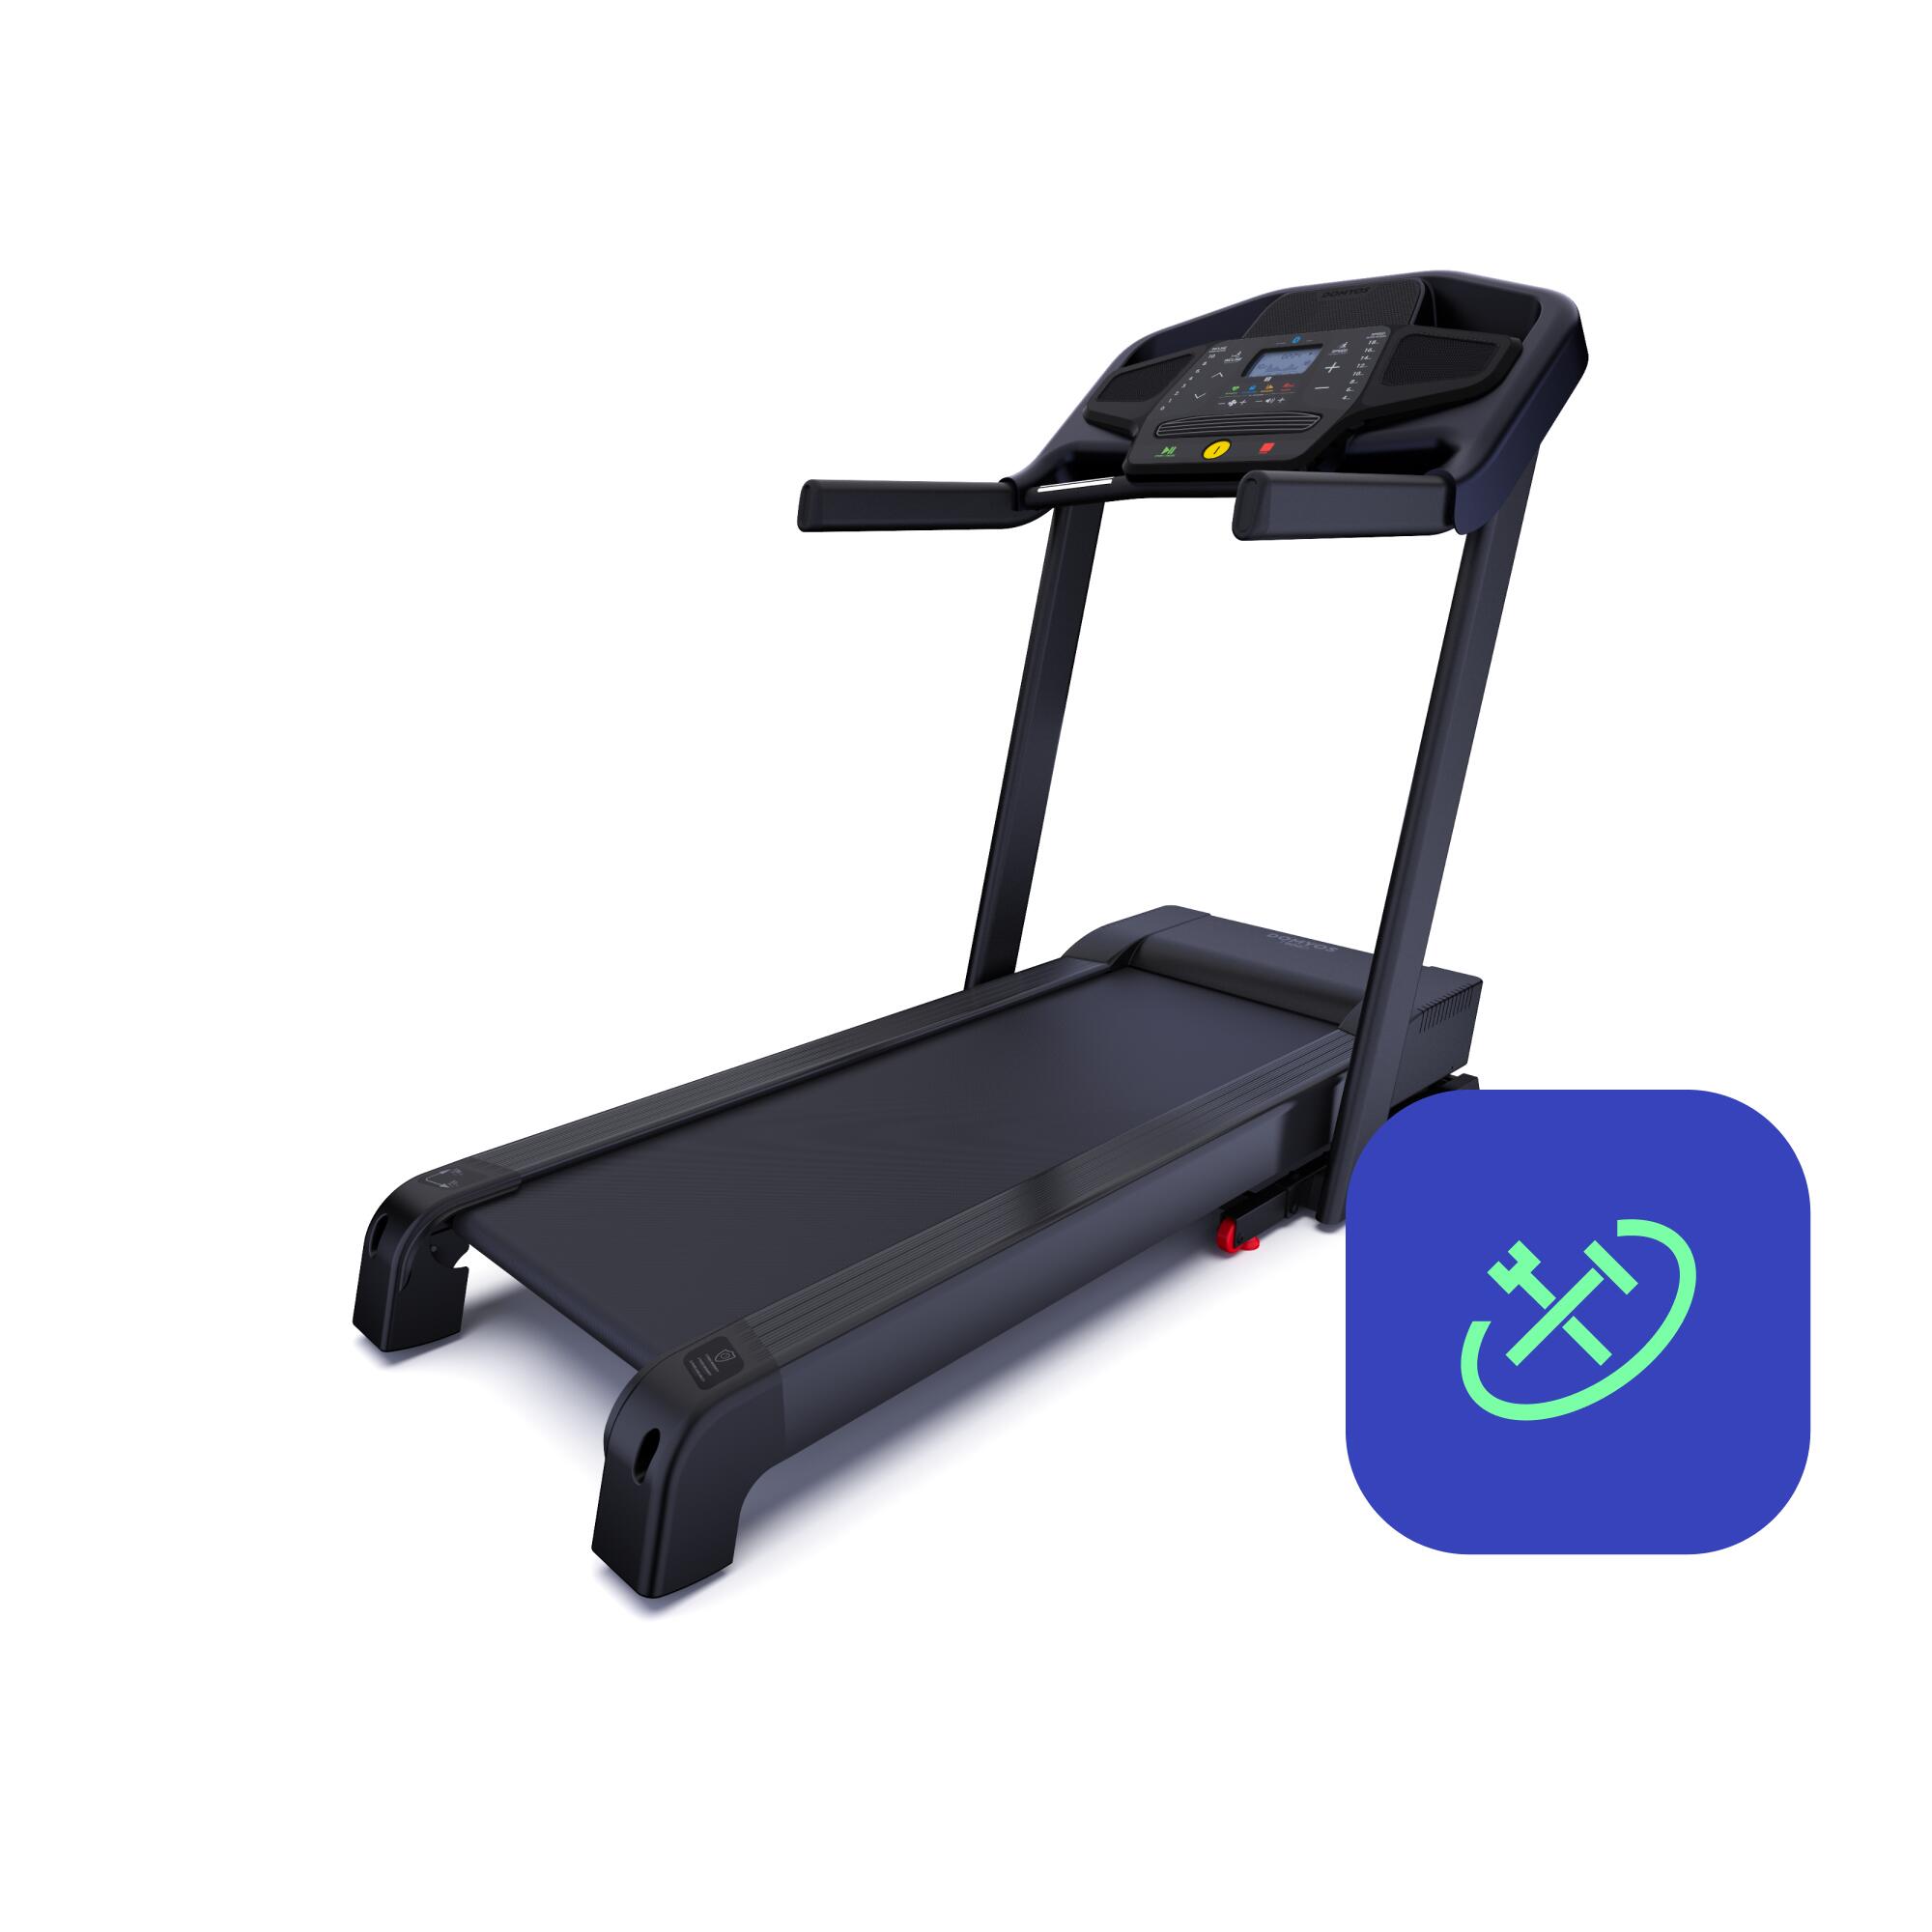 Fitness Equipment Services